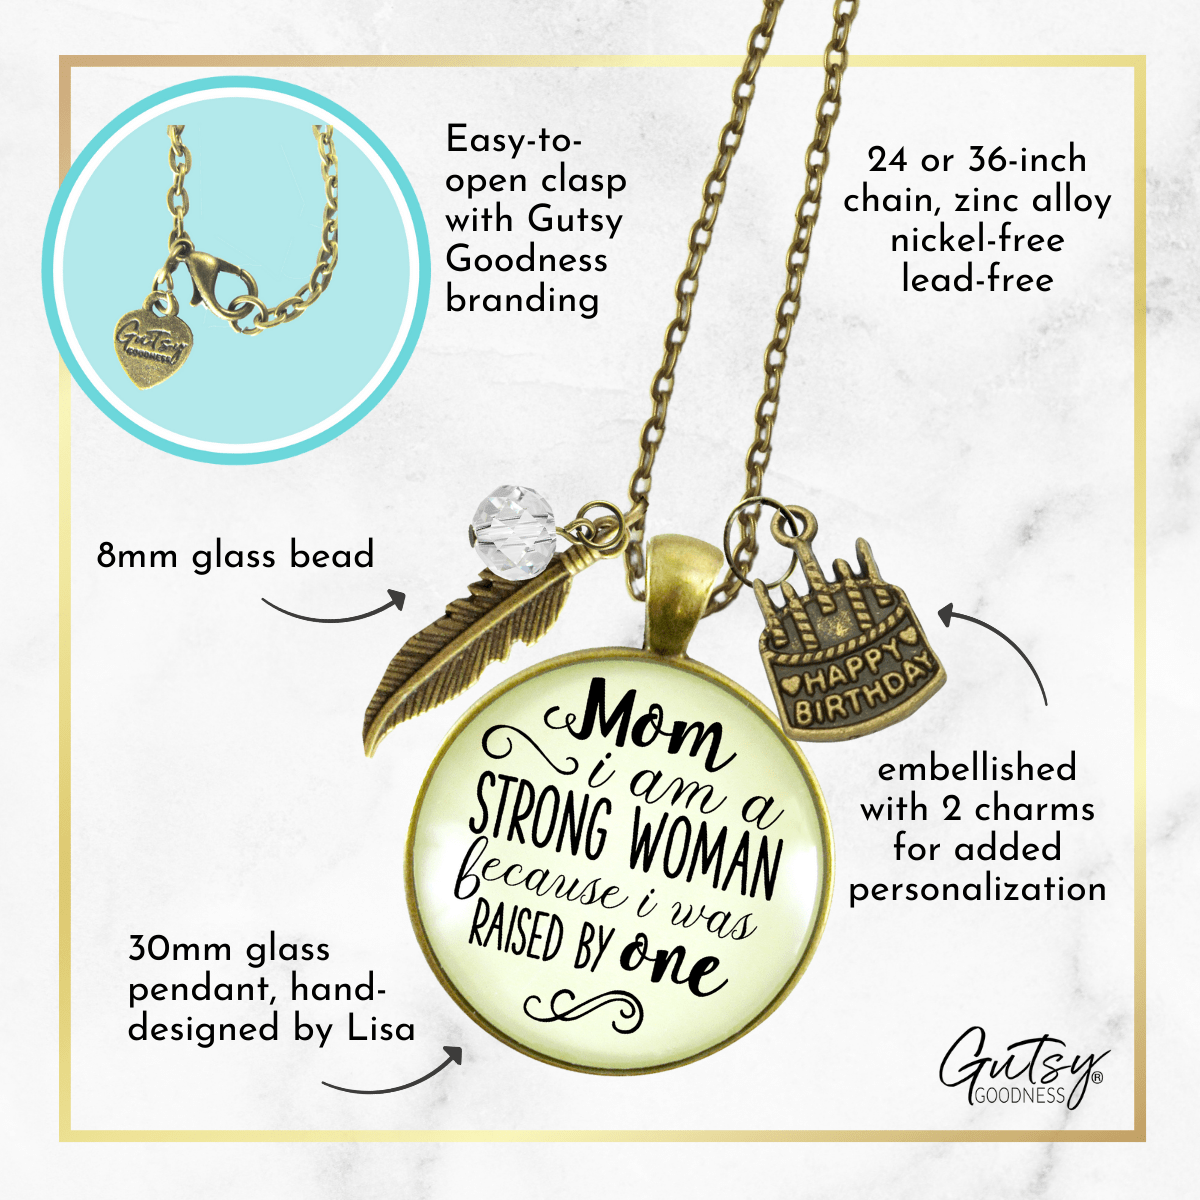 Gutsy Goodness Mom Birthday Gift Necklace I am a Strong Woman from Daughter Jewelry - Gutsy Goodness Handmade Jewelry;Mom Birthday Gift Necklace I Am A Strong Woman From Daughter Jewelry - Gutsy Goodness Handmade Jewelry Gifts